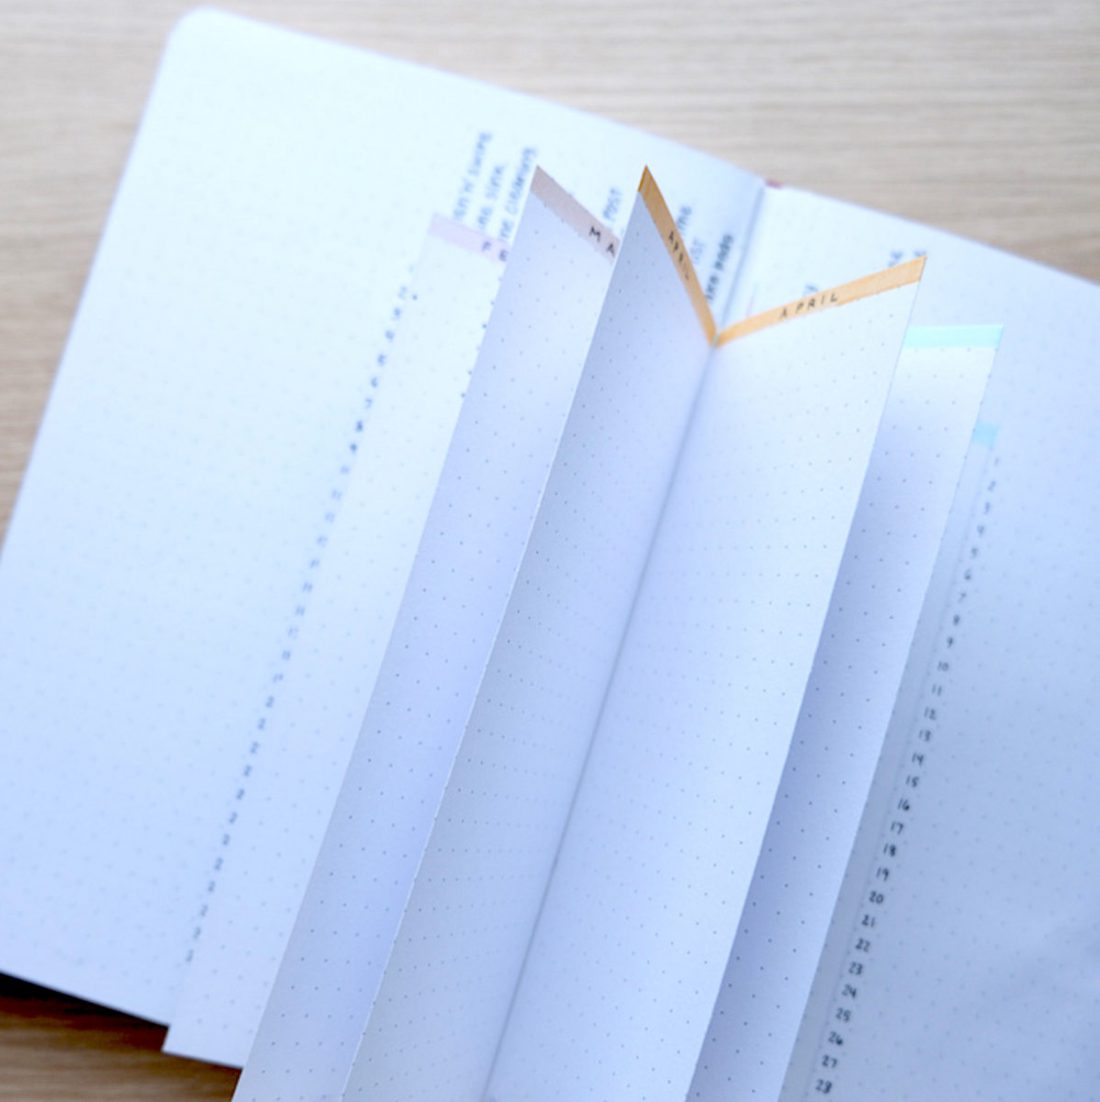 an open journal with fanned out pages of a habit tracker with colorful labels.